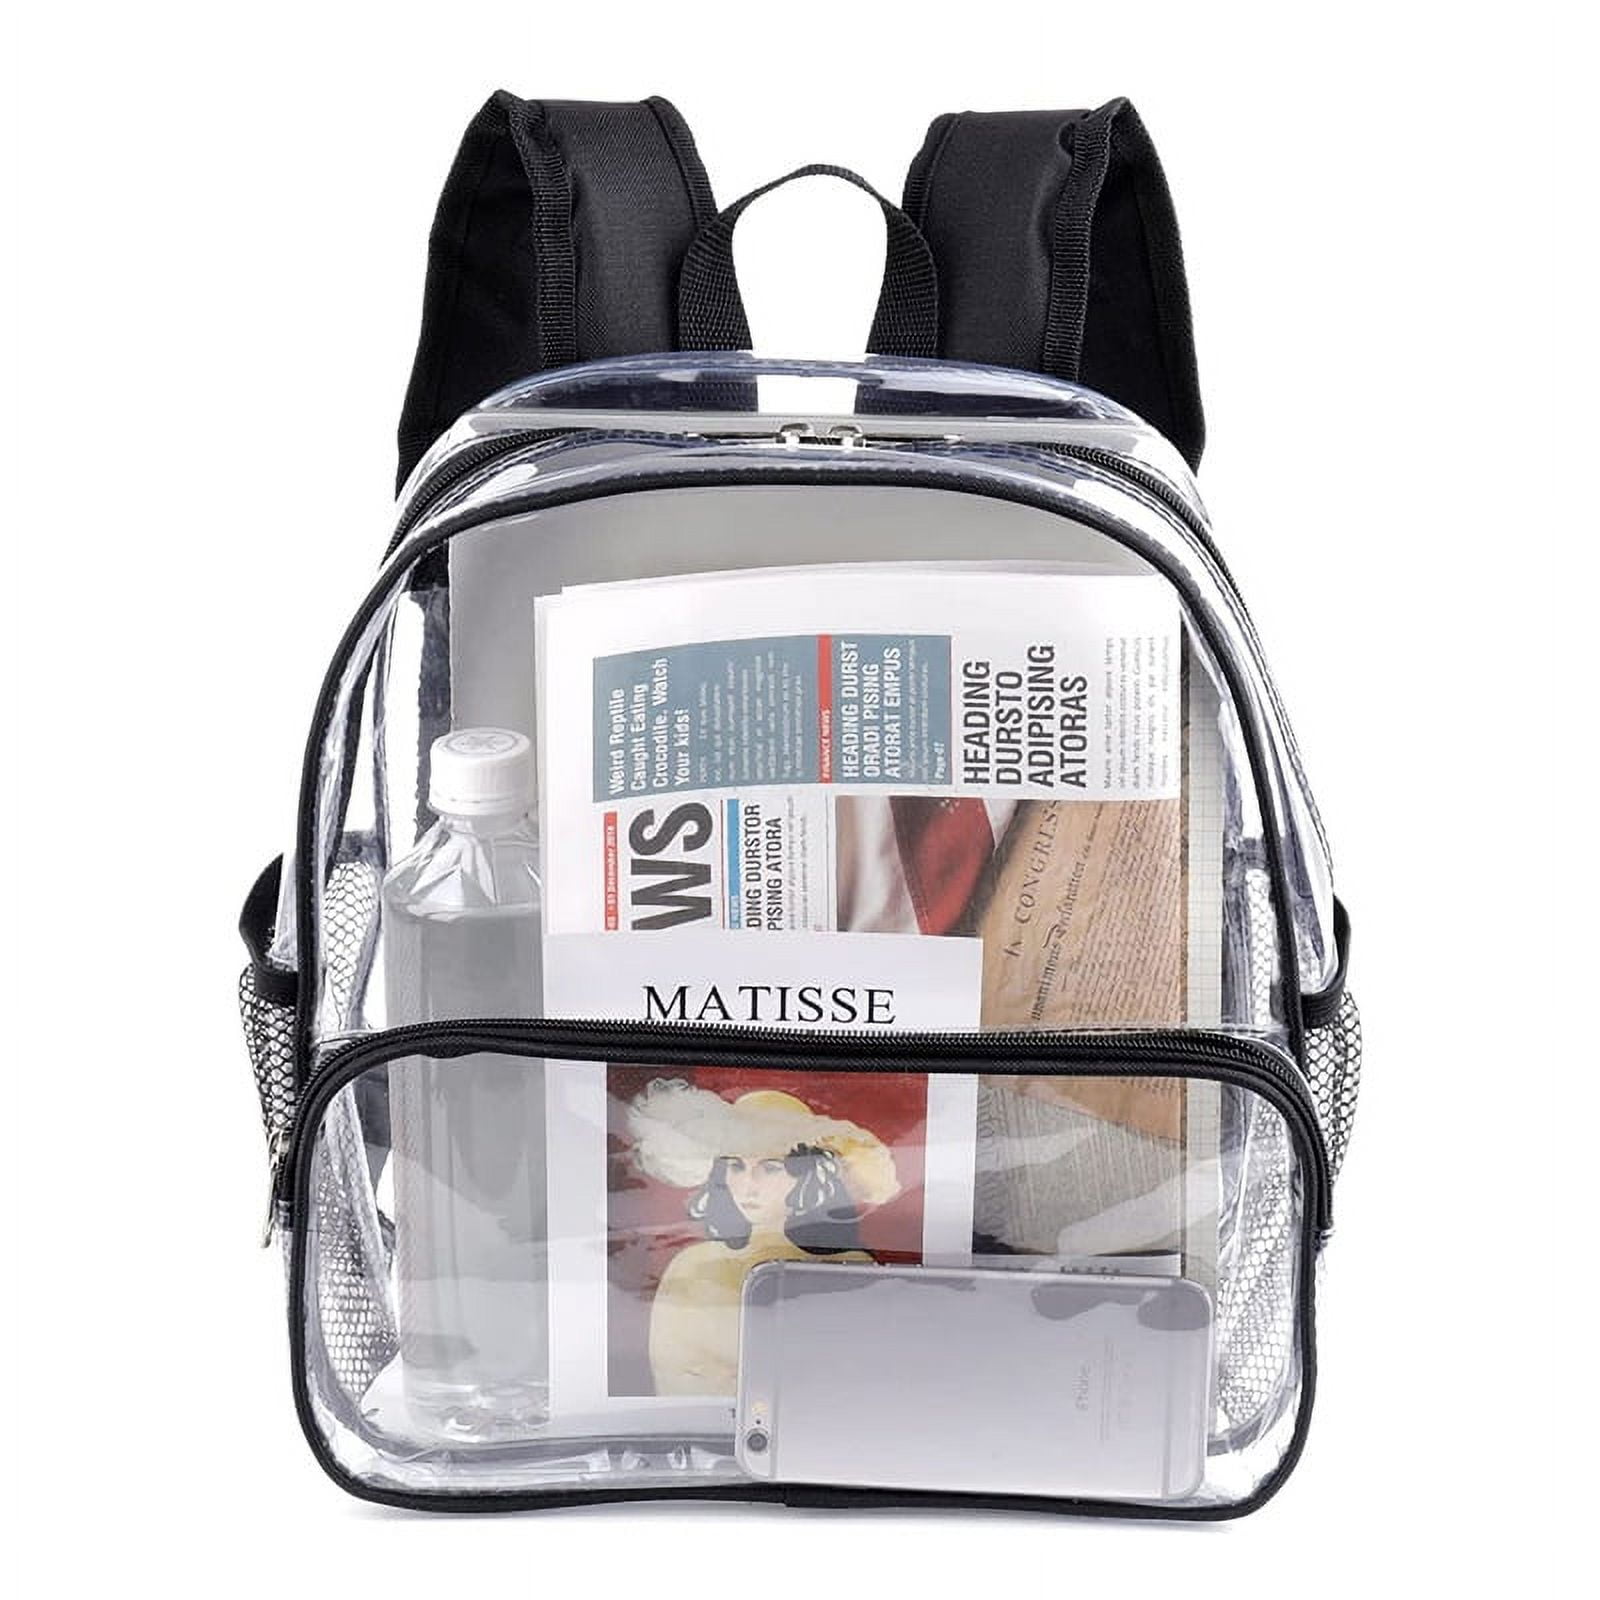 CAMTOP Clear Backpack 12x6x12 Stadium Approved Mini Transparent Backpacks  Plastics See Through Bag for Security Work Concert Sport Festival Travel